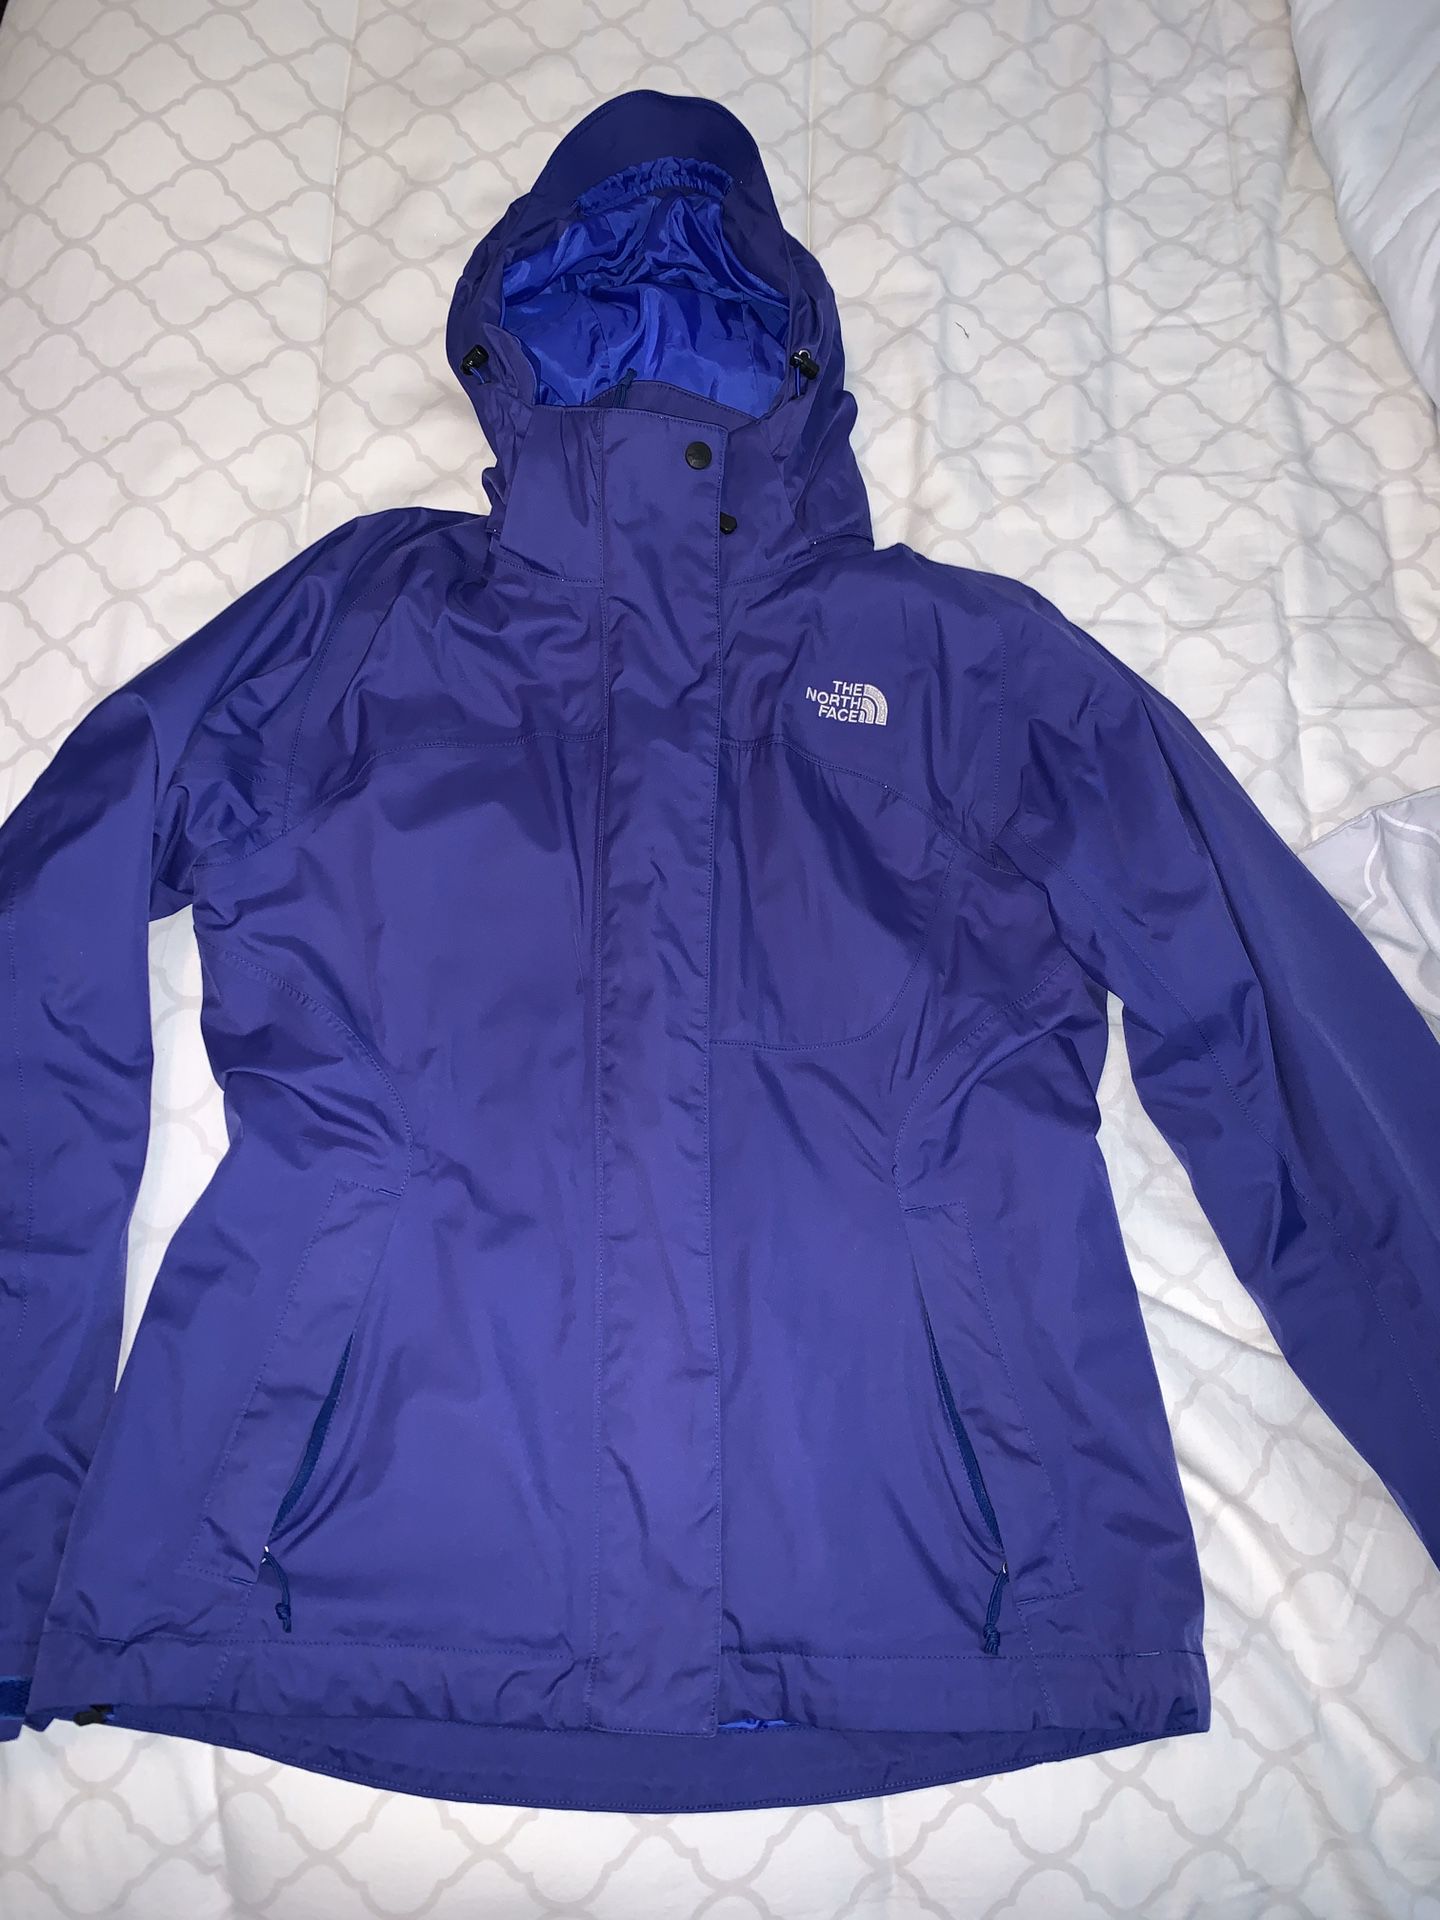 Women’s North Face blue jacket Size Small